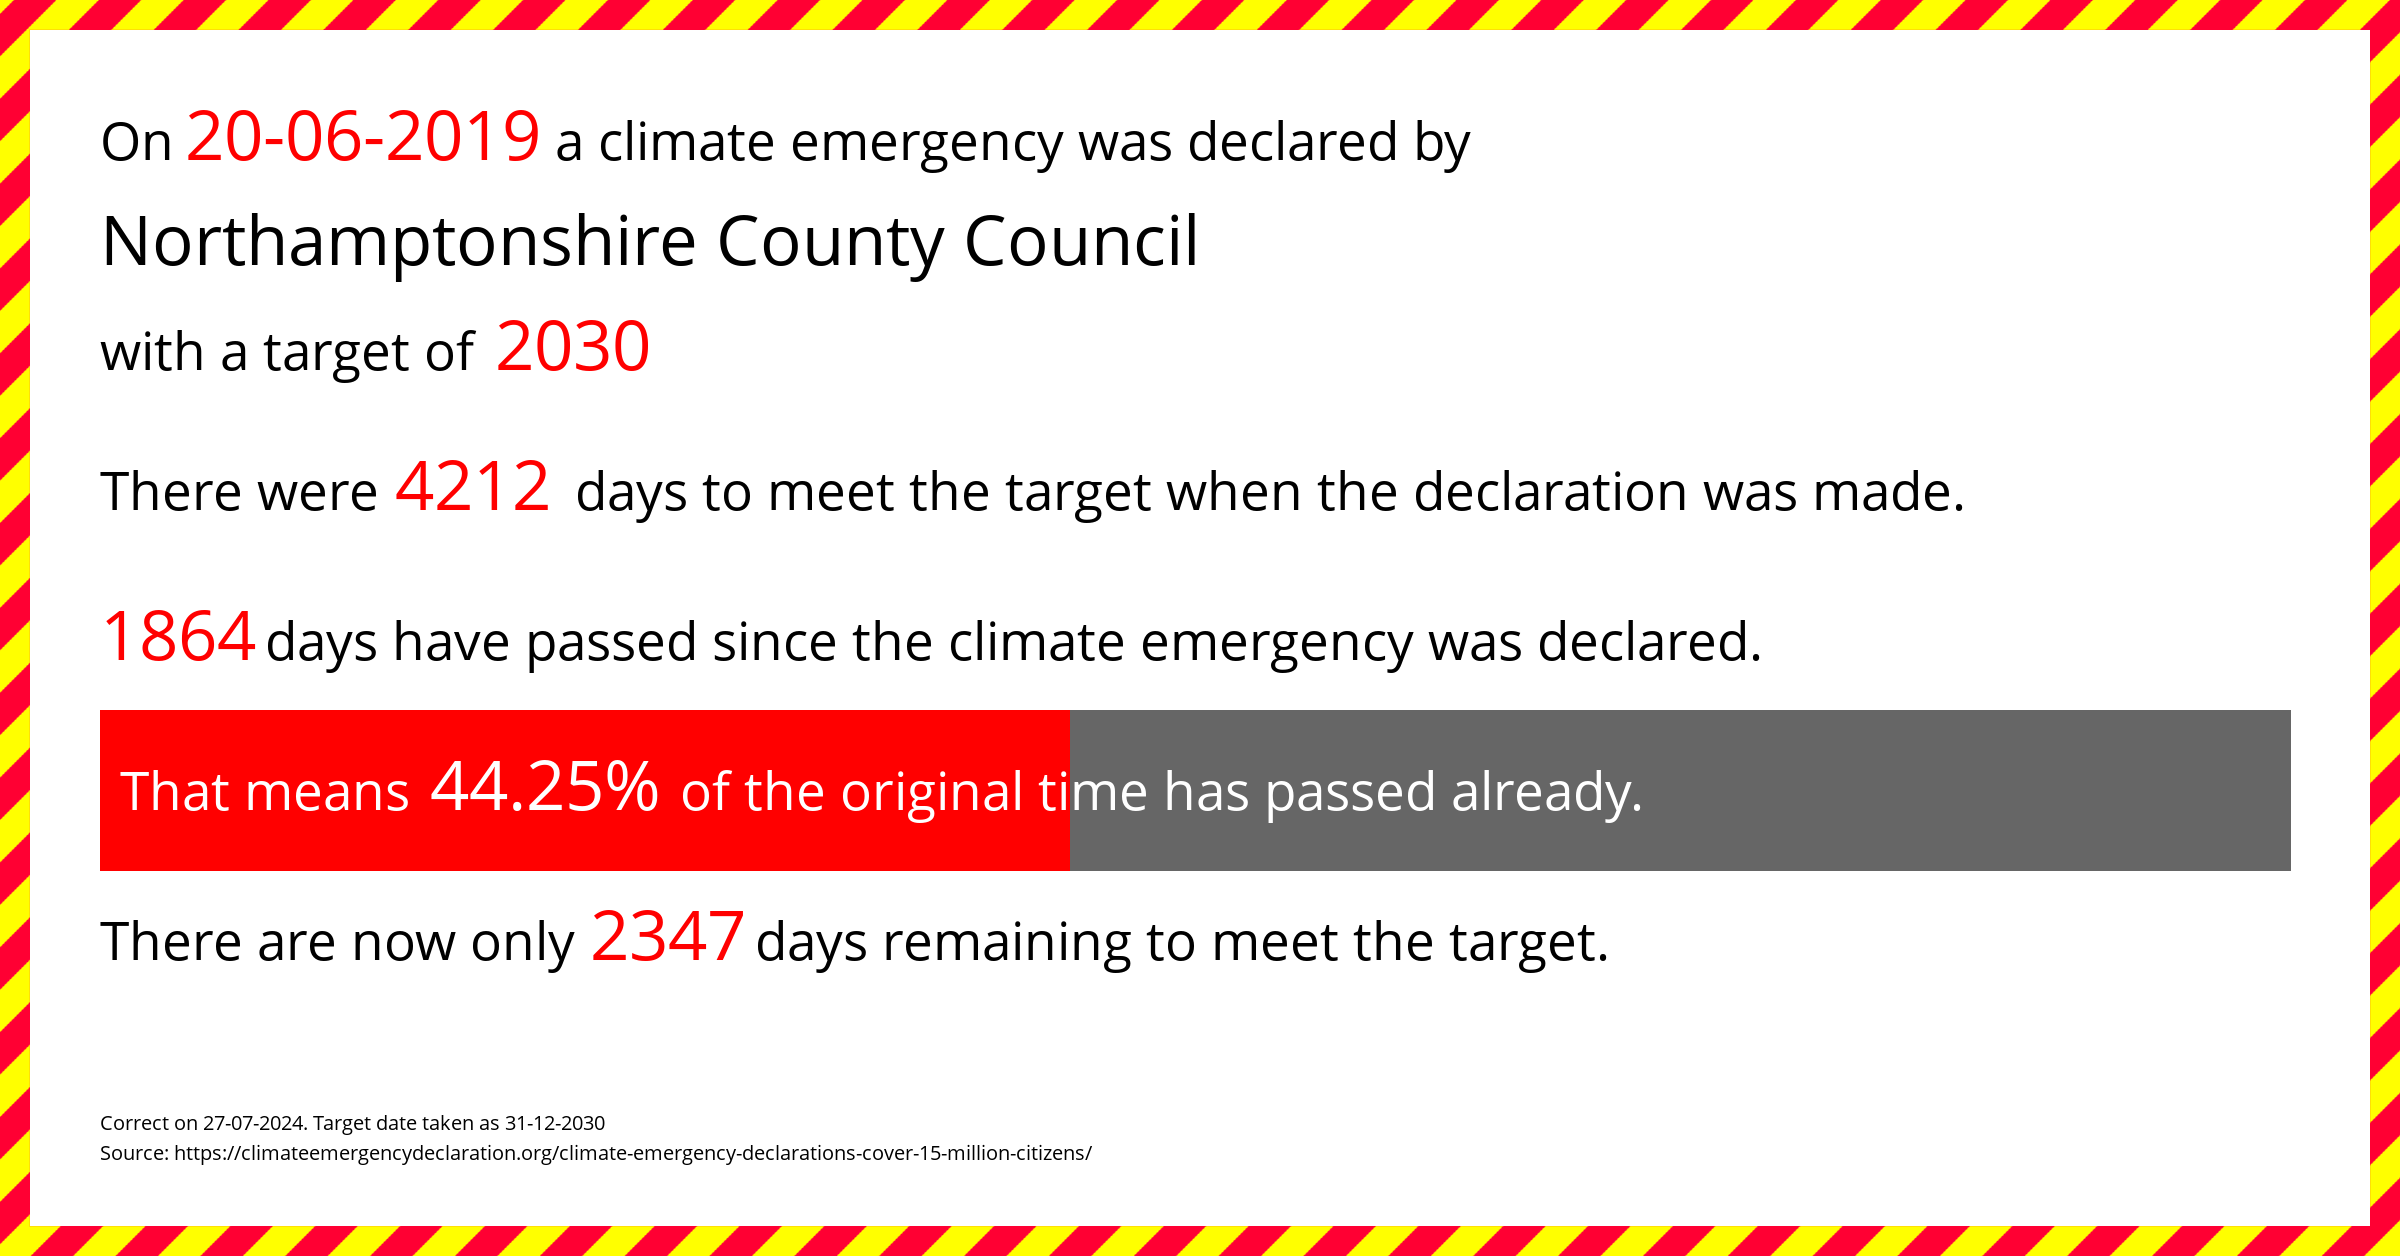 Northamptonshire County Council declared a Climate emergency on Thursday 20th June 2019, with a target of 2030.